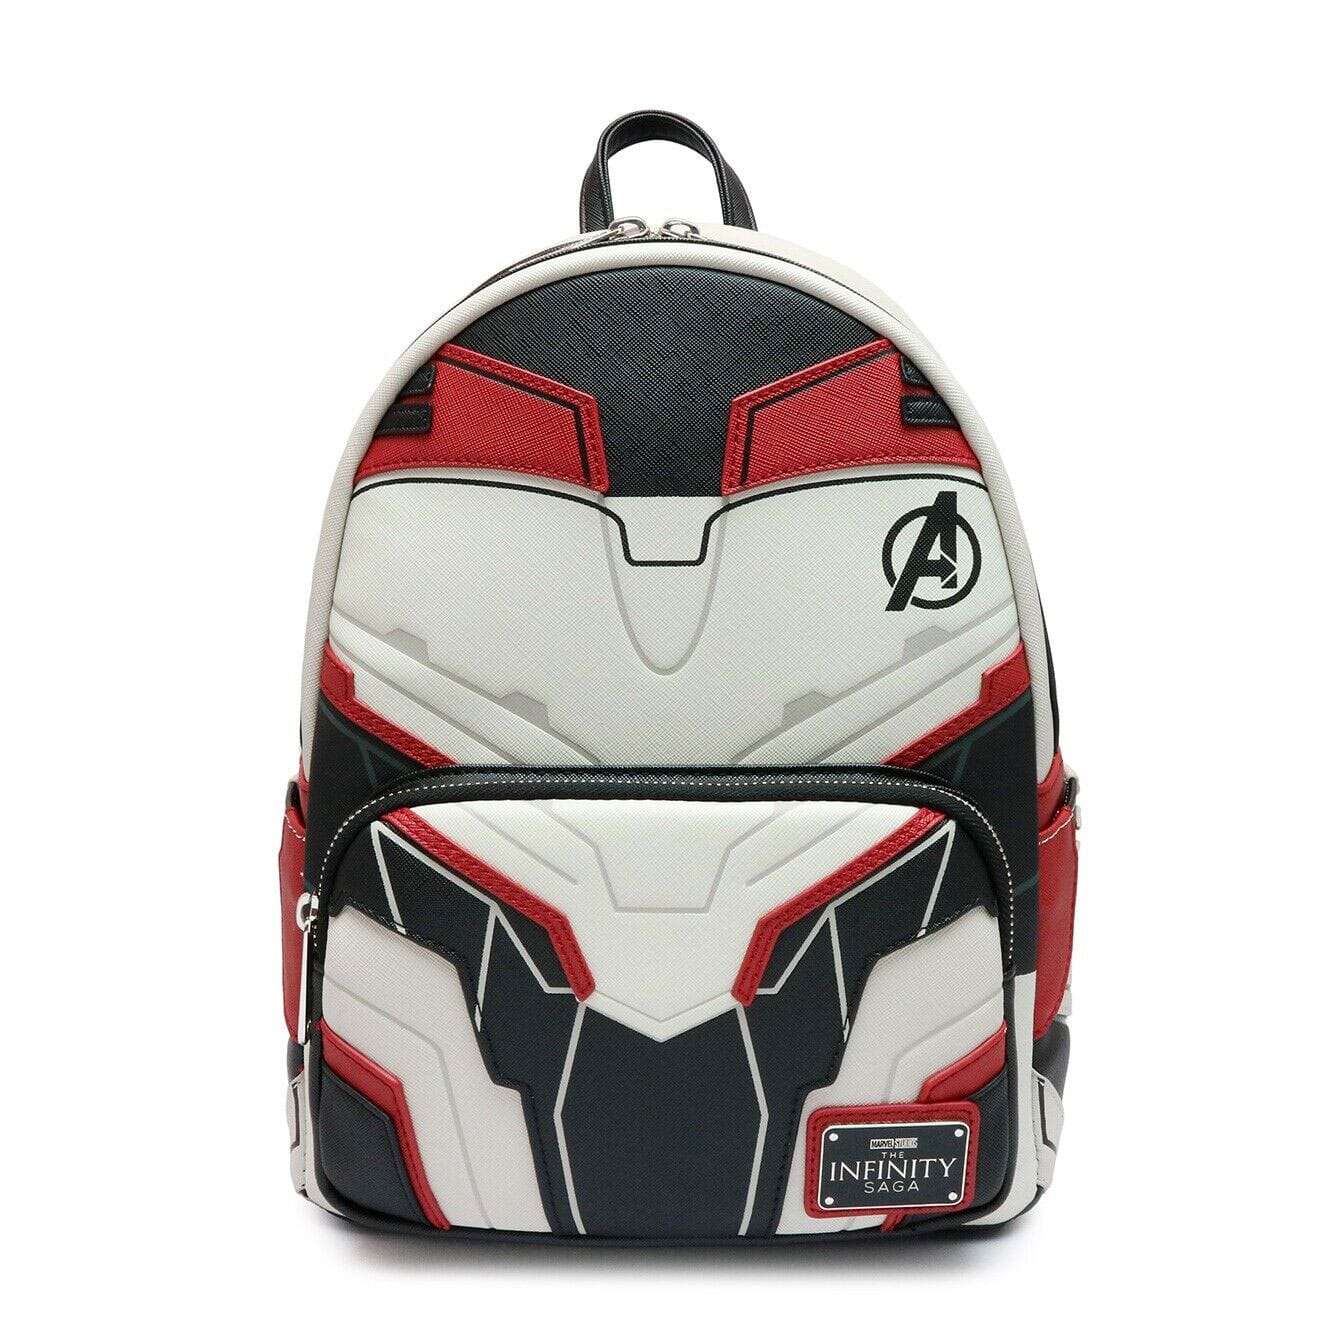 Marvel by Loungefly sac à dos Team Suit (Japan Exclusive) Sac à Dos Marvel Avengers Loungefly